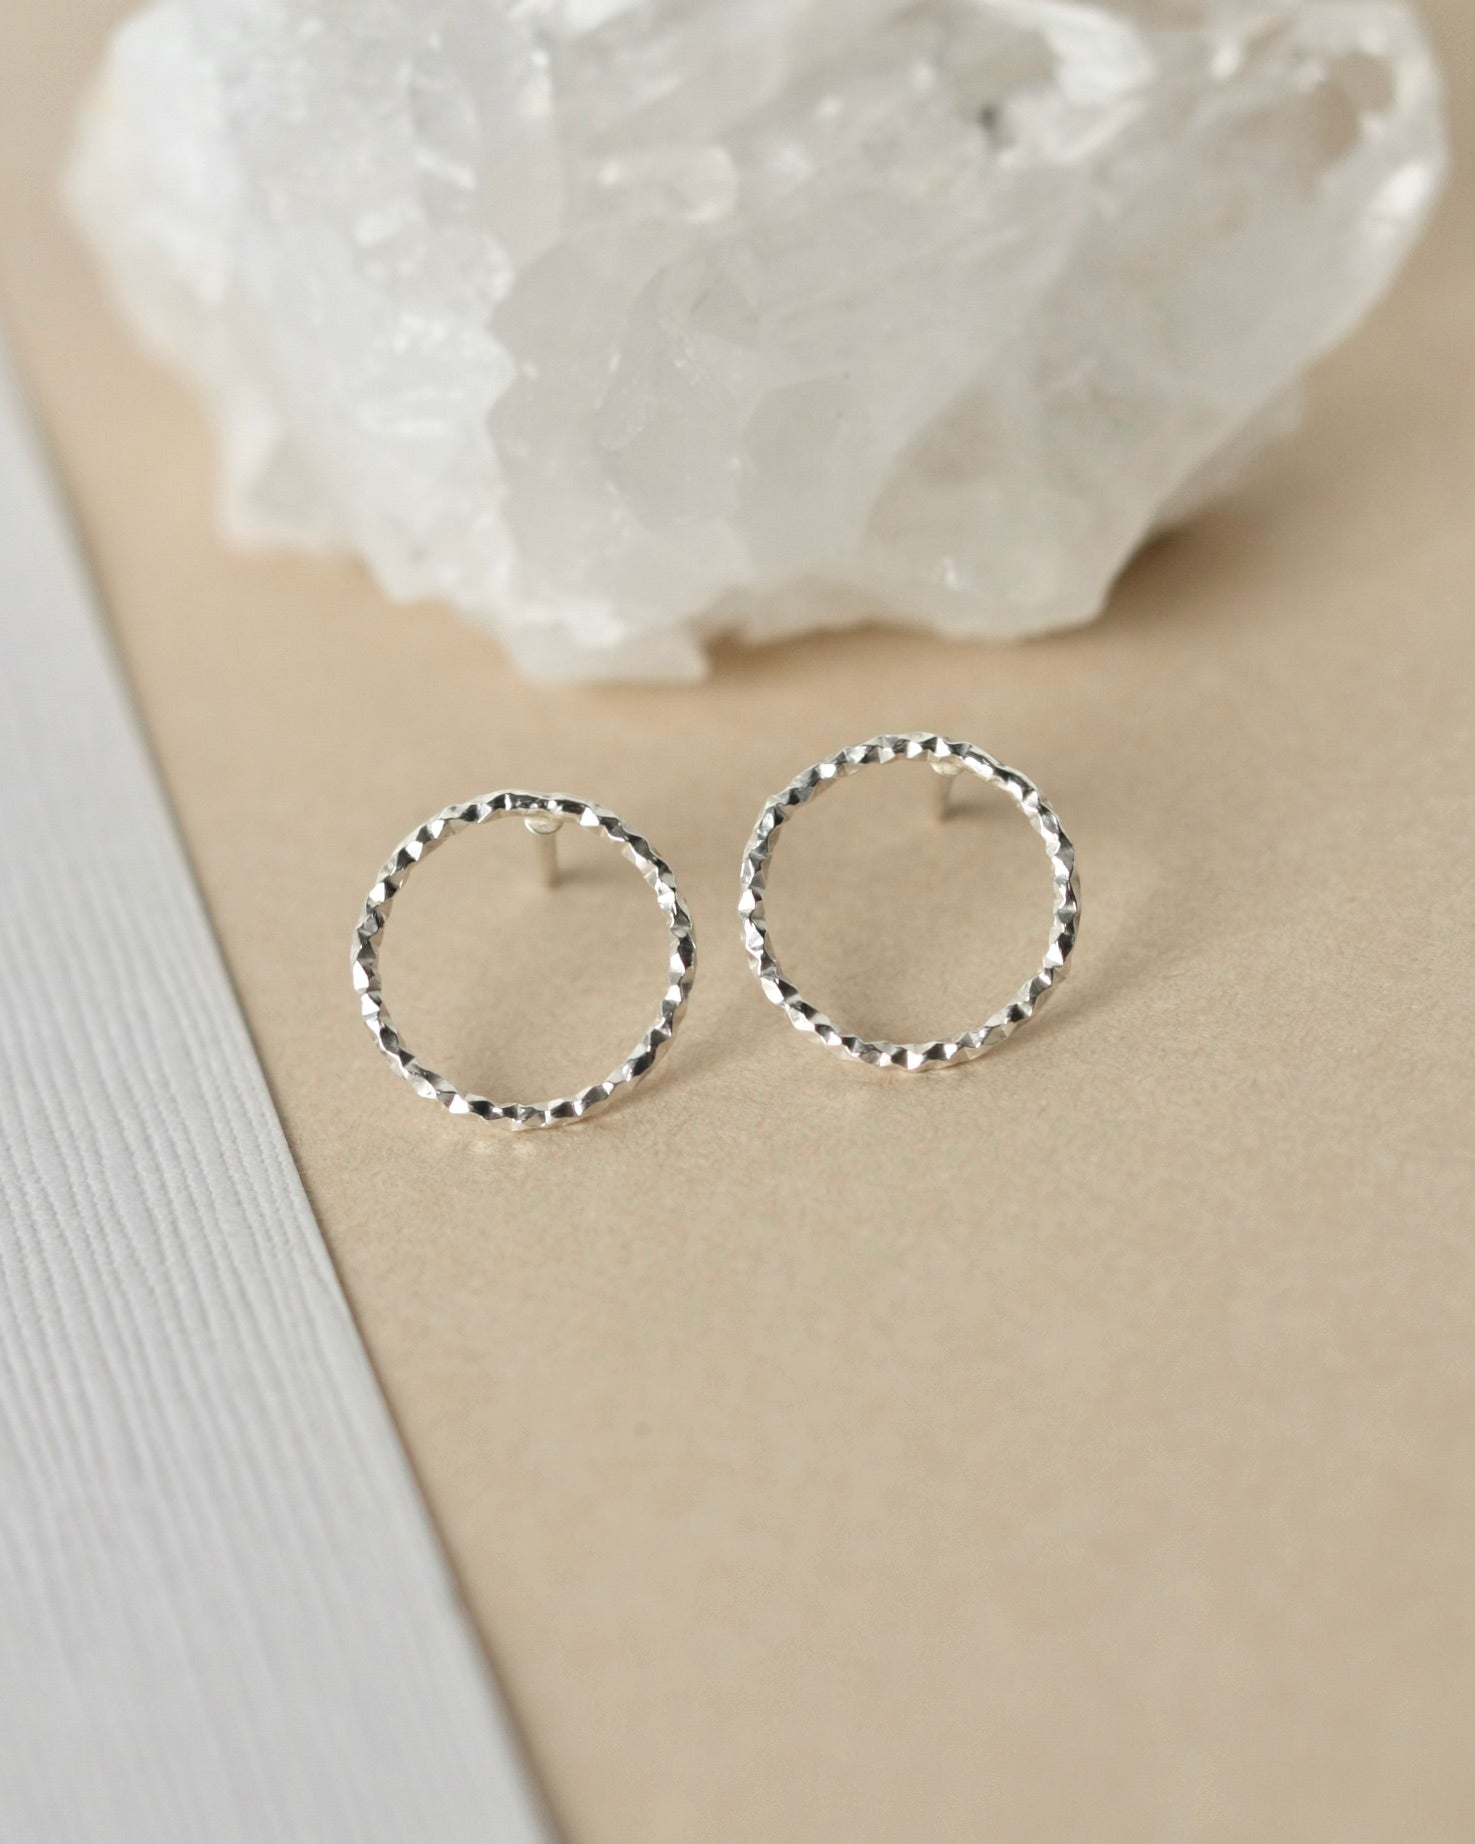 Simple Round 12mm One Touch Earring jewelry Making, Earring